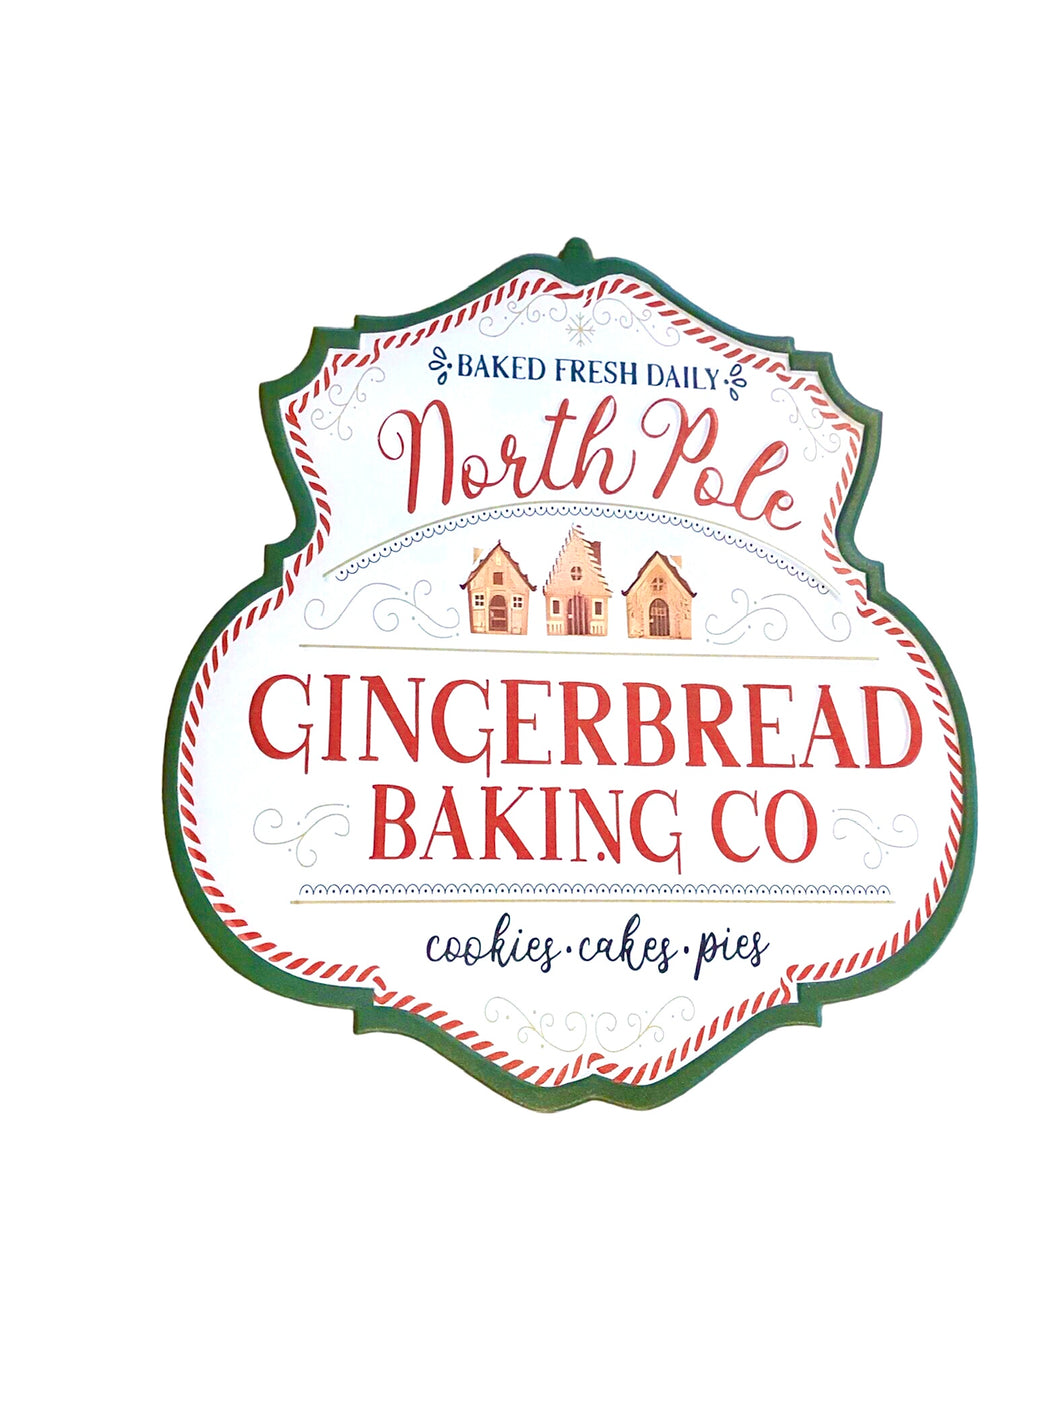 North Pole Gingerbread baking Co. Sign